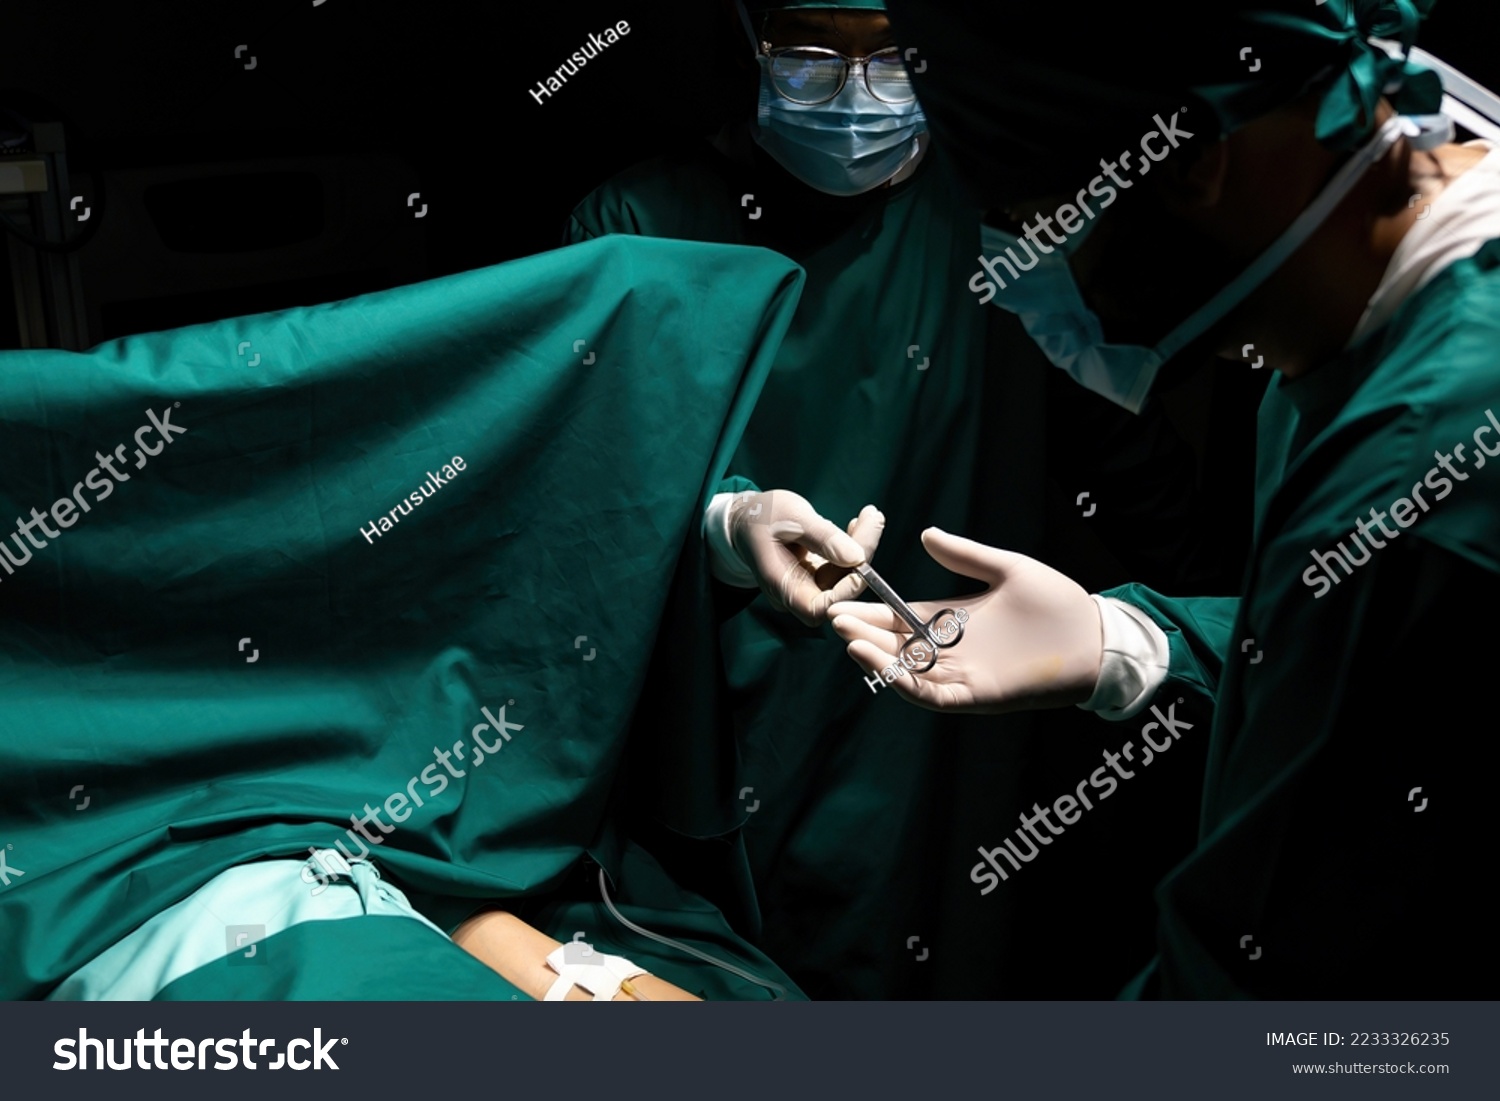 Asian doctors perform surgery A group of surgeons at work is busy with patients. Veterinary medicine or health care and hospital emergencies #2233326235